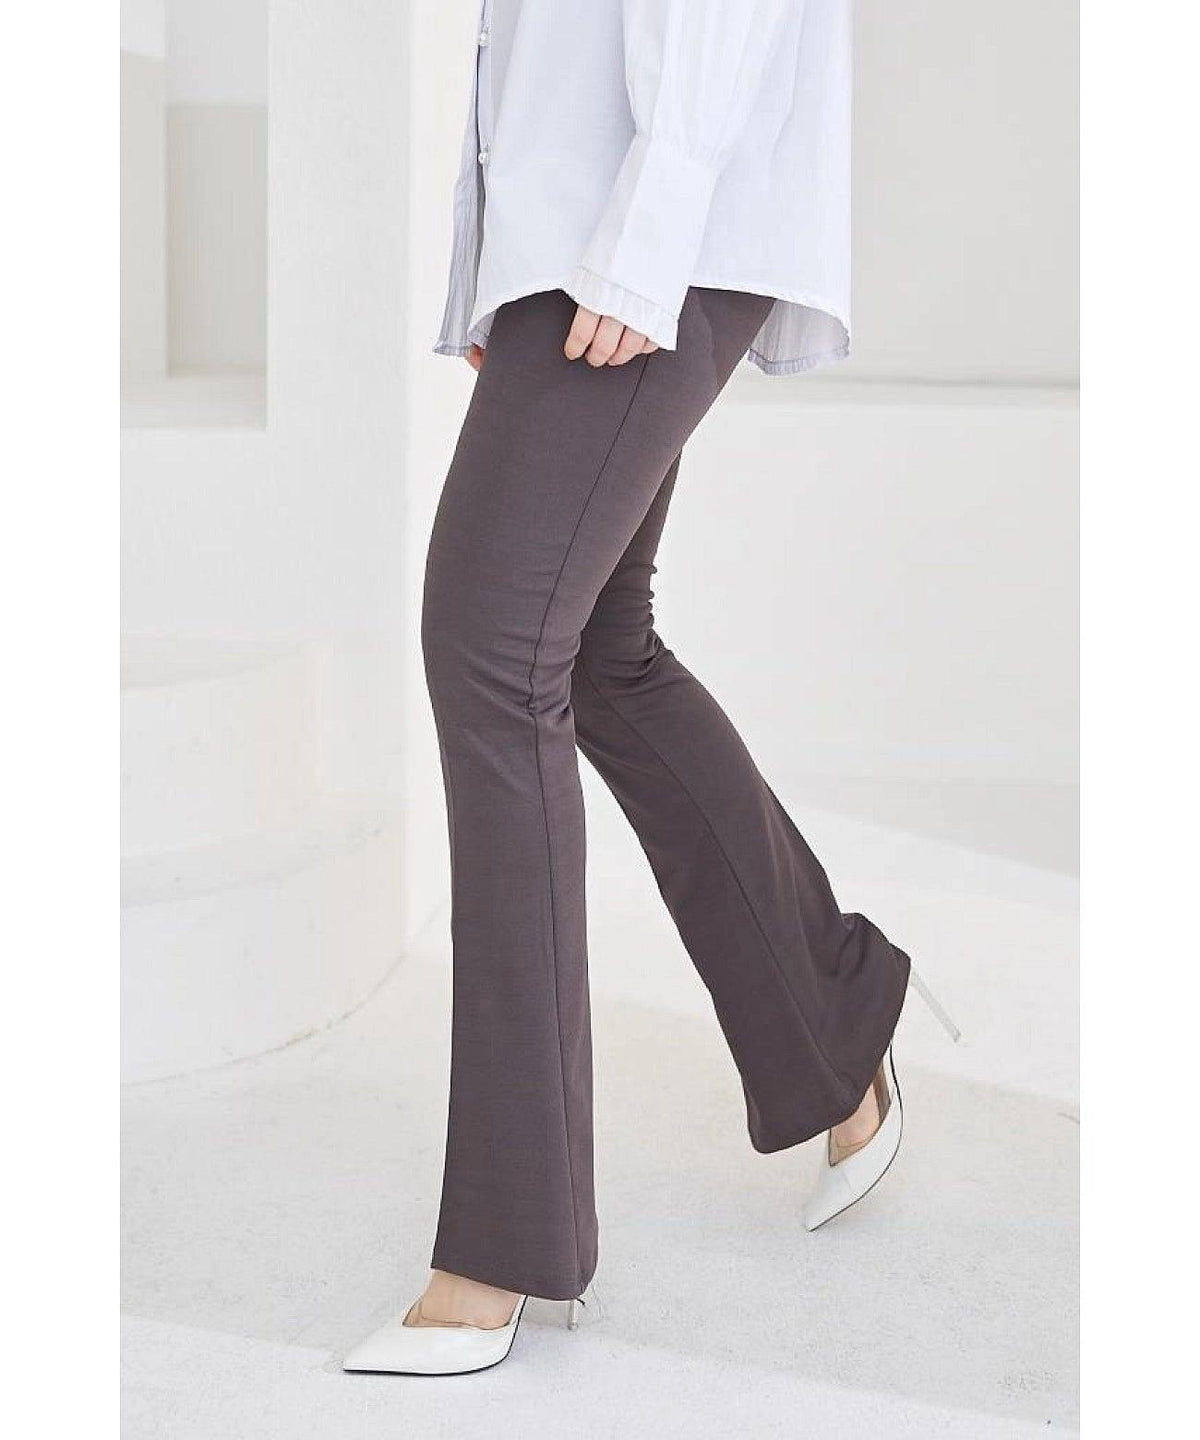 Flare Dress Pants for Women - Anthracite Grey